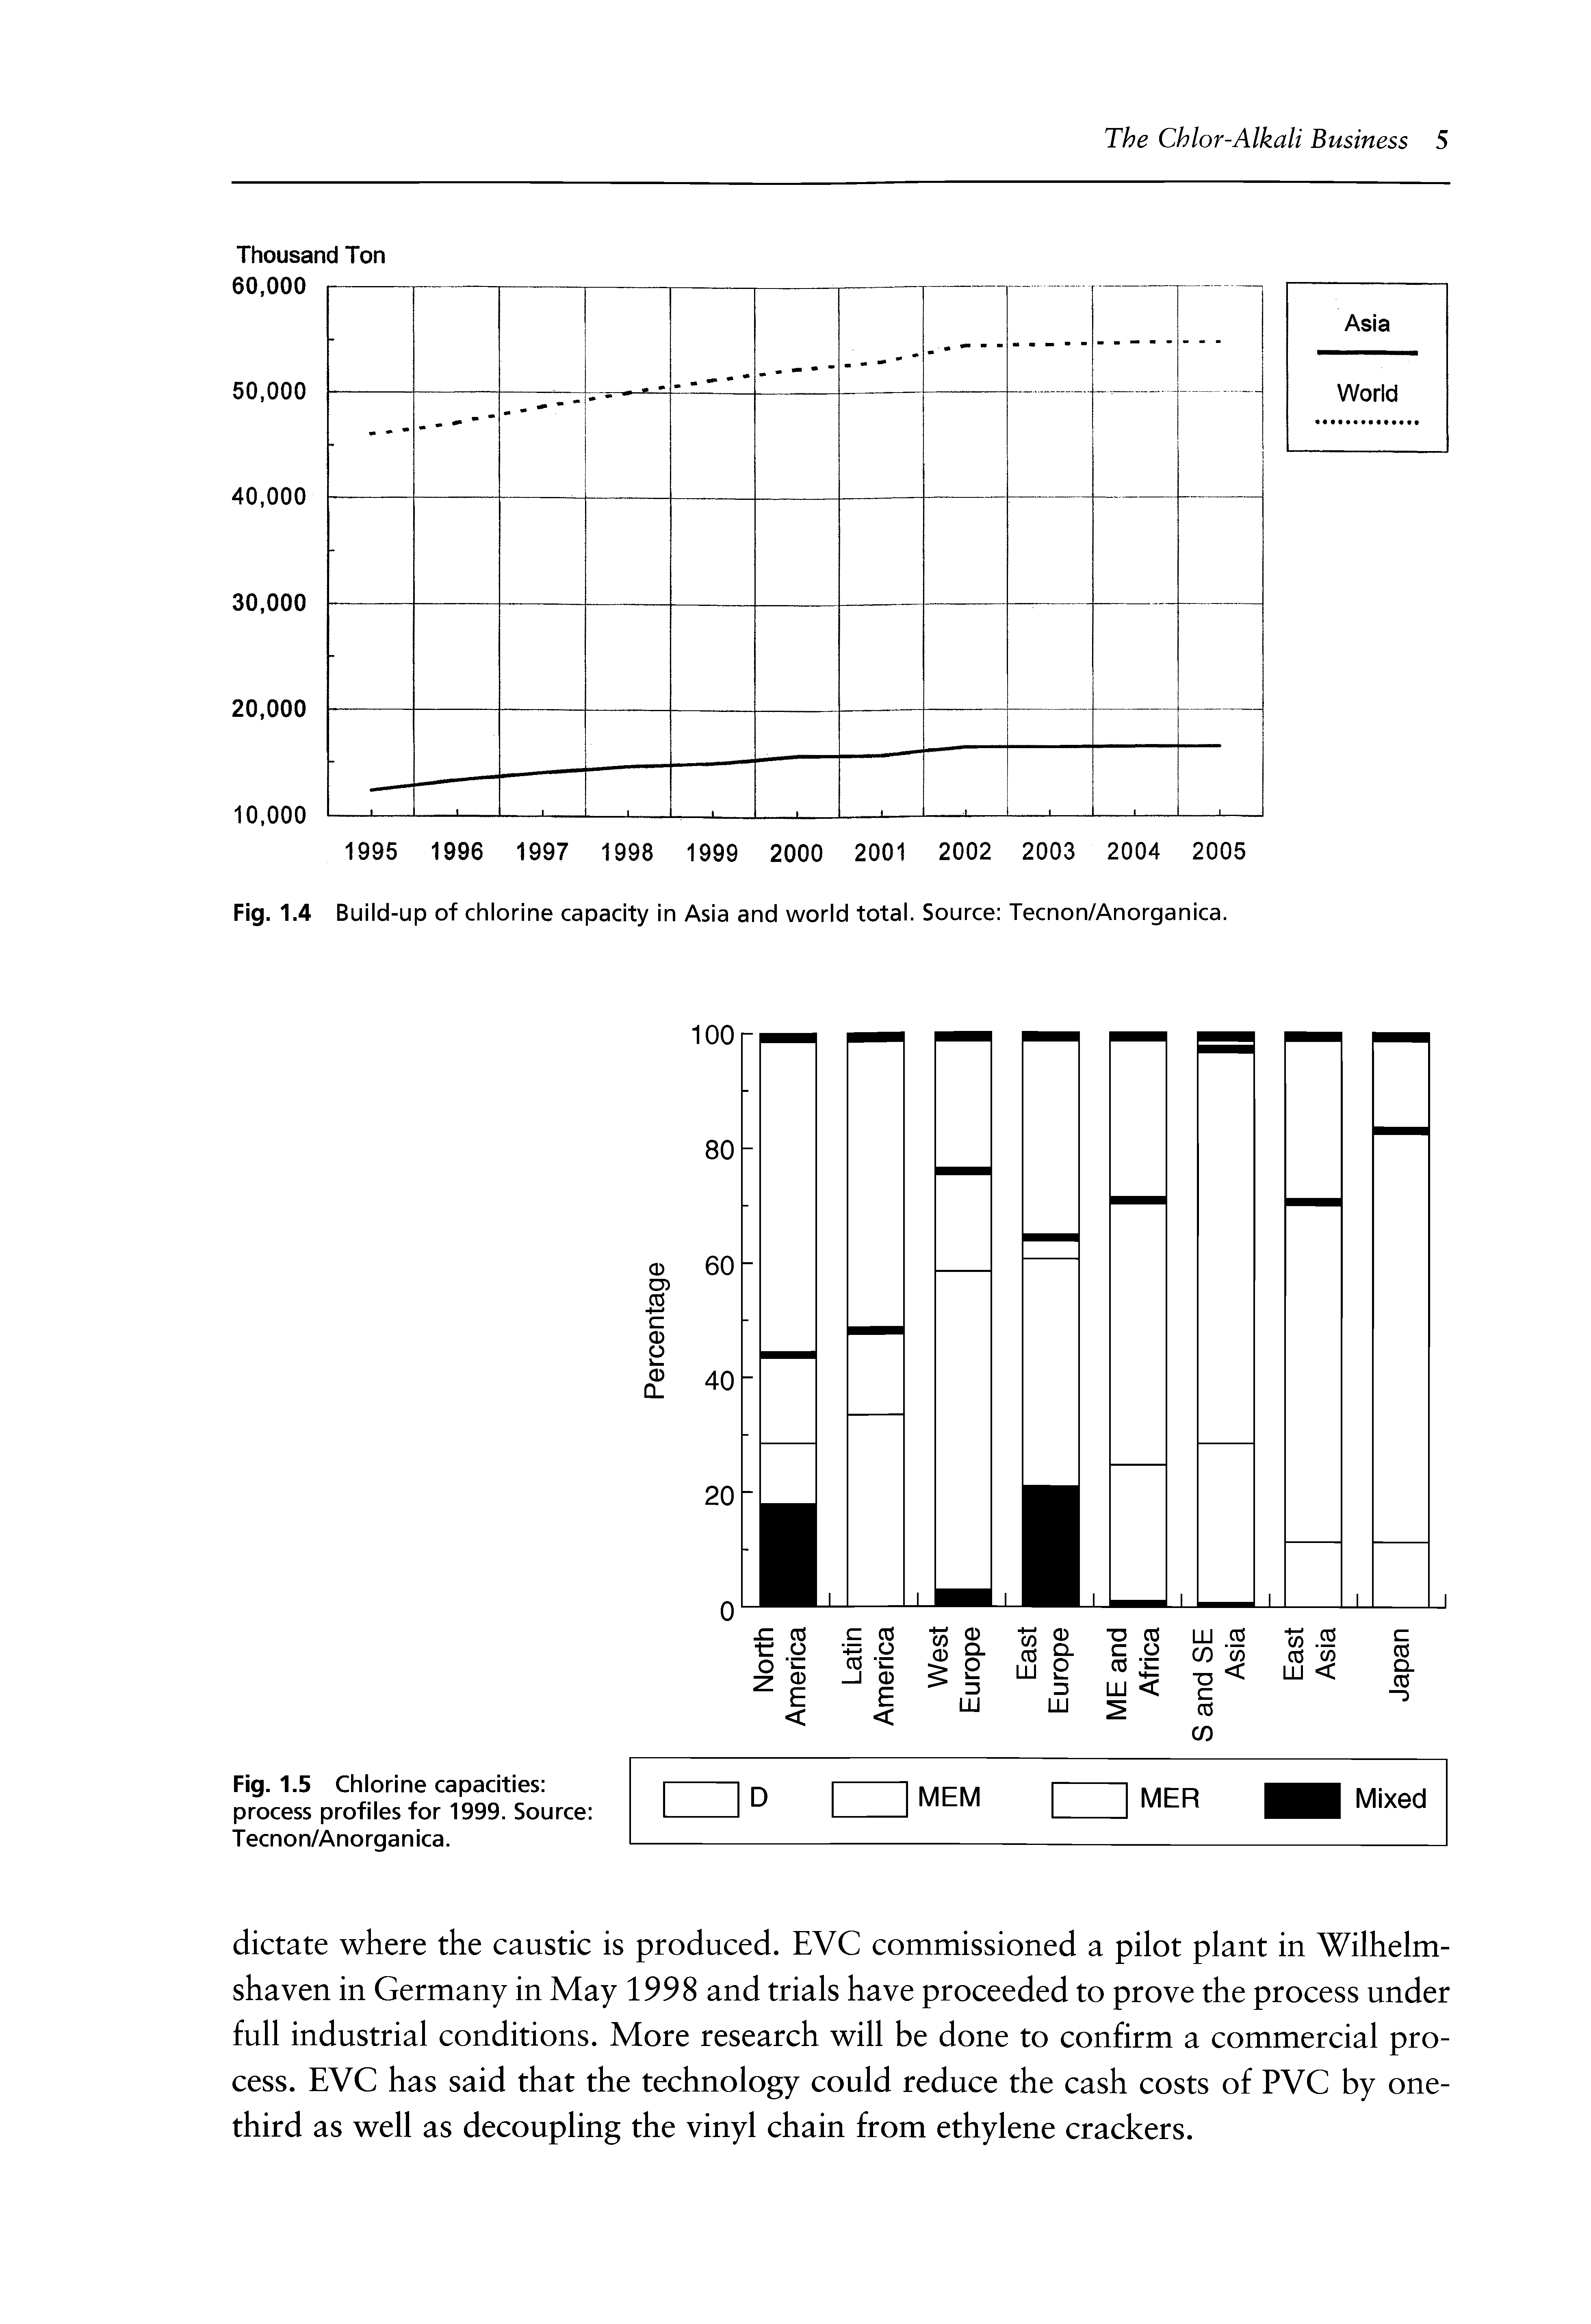 Fig. 1.5 Chlorine capacities process profiles for 1999. Source Tecnon/Anorganica.